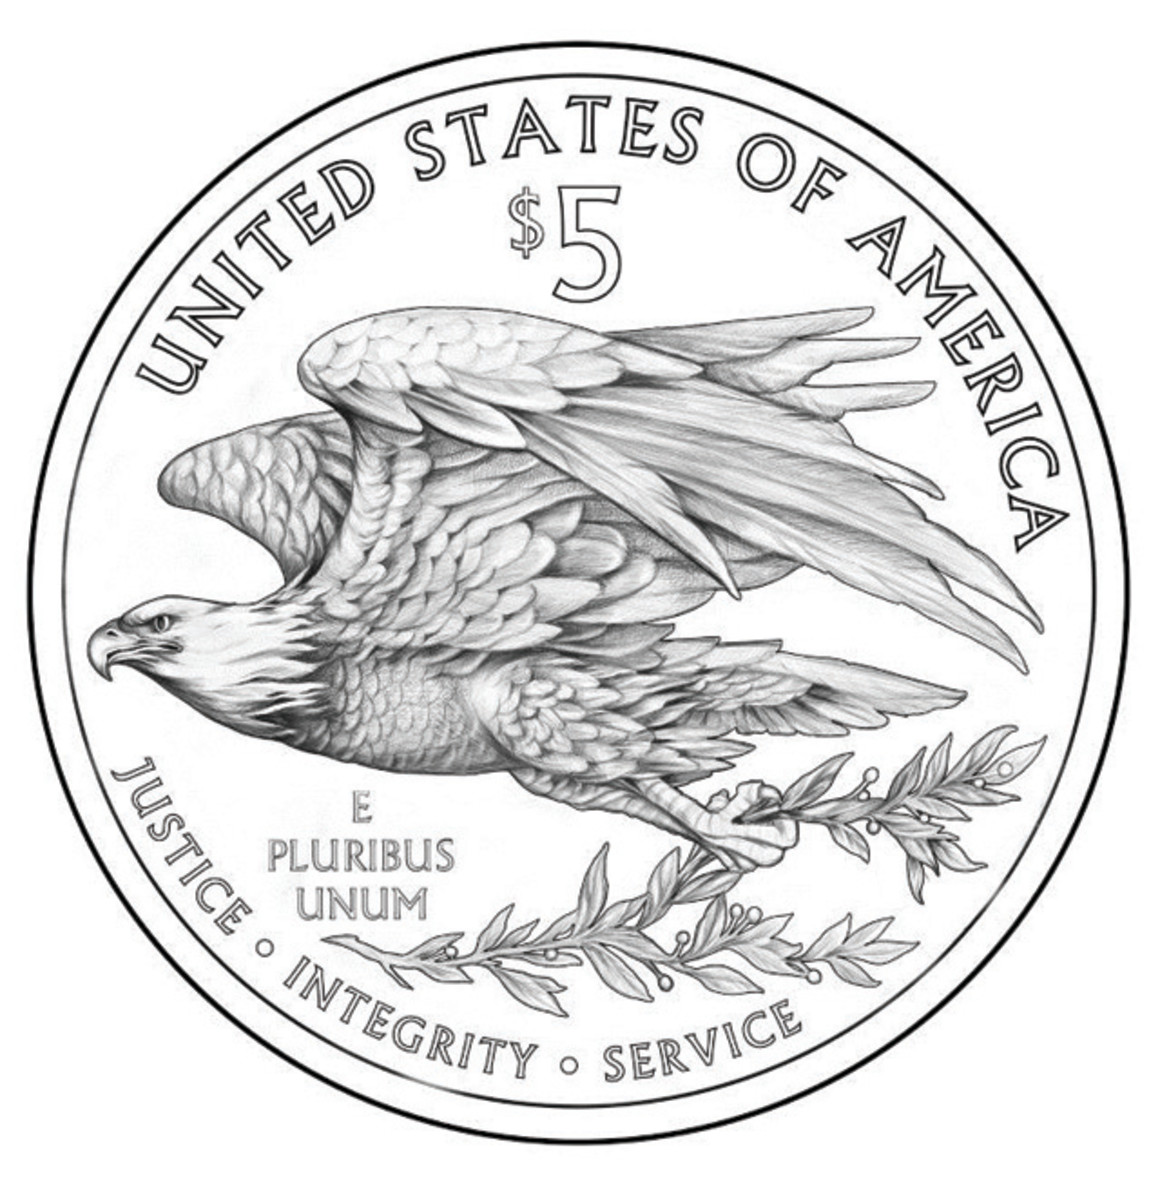 The new eagle would feature on the reverse of the 2015 UHR coin